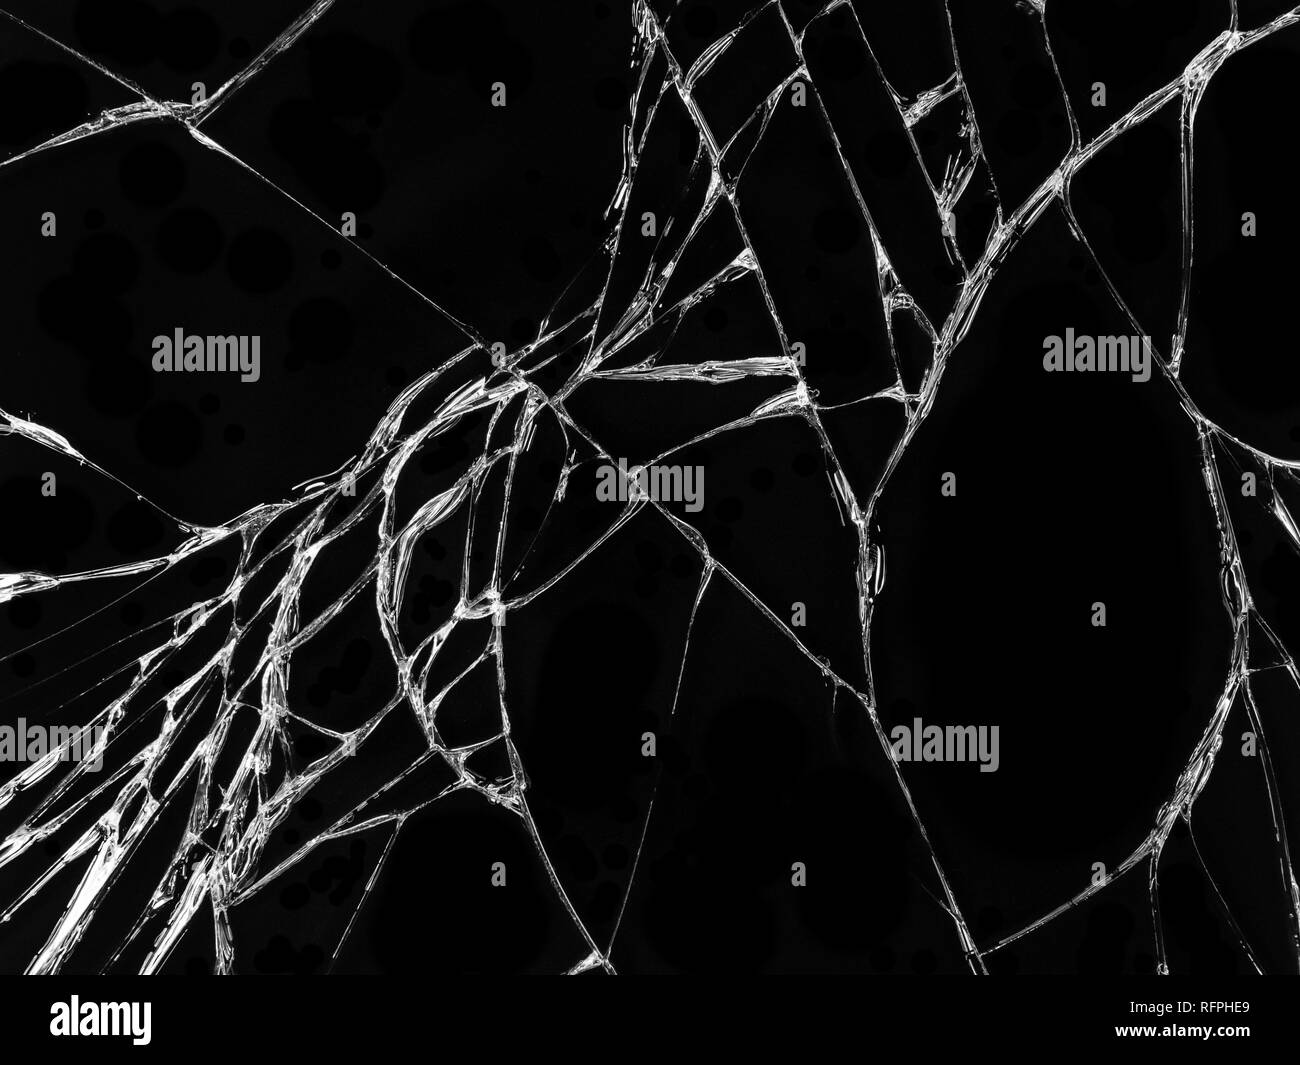 Cracked glass texture on black background. Isolated realistic cracked glass  effect Stock Photo - Alamy